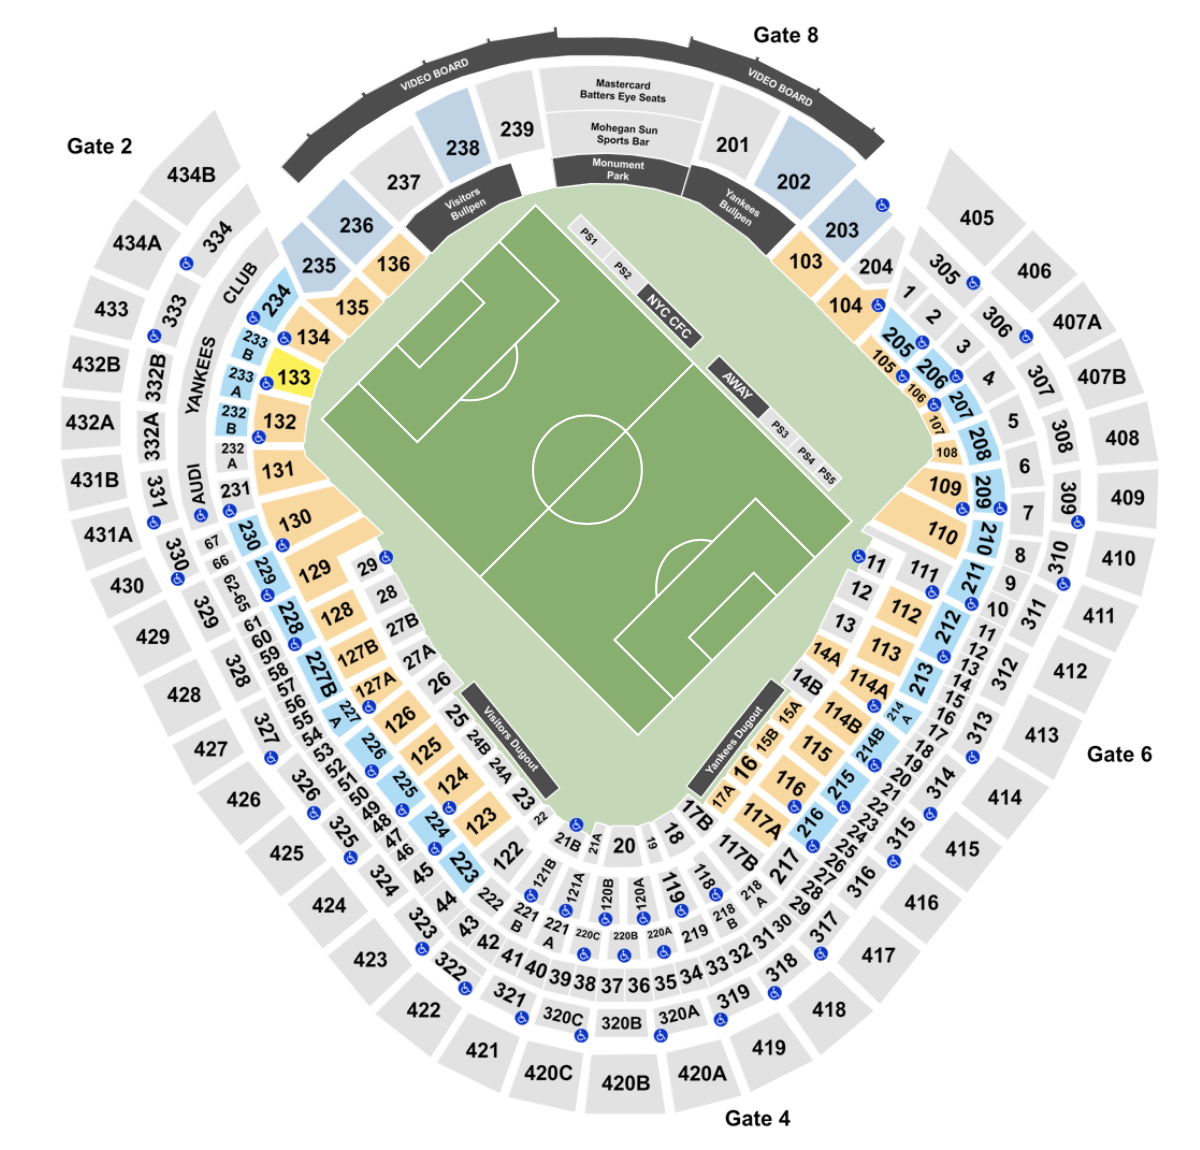 Yankee Stadium Seating Charts + Info On Rows, Sections and Club Seats